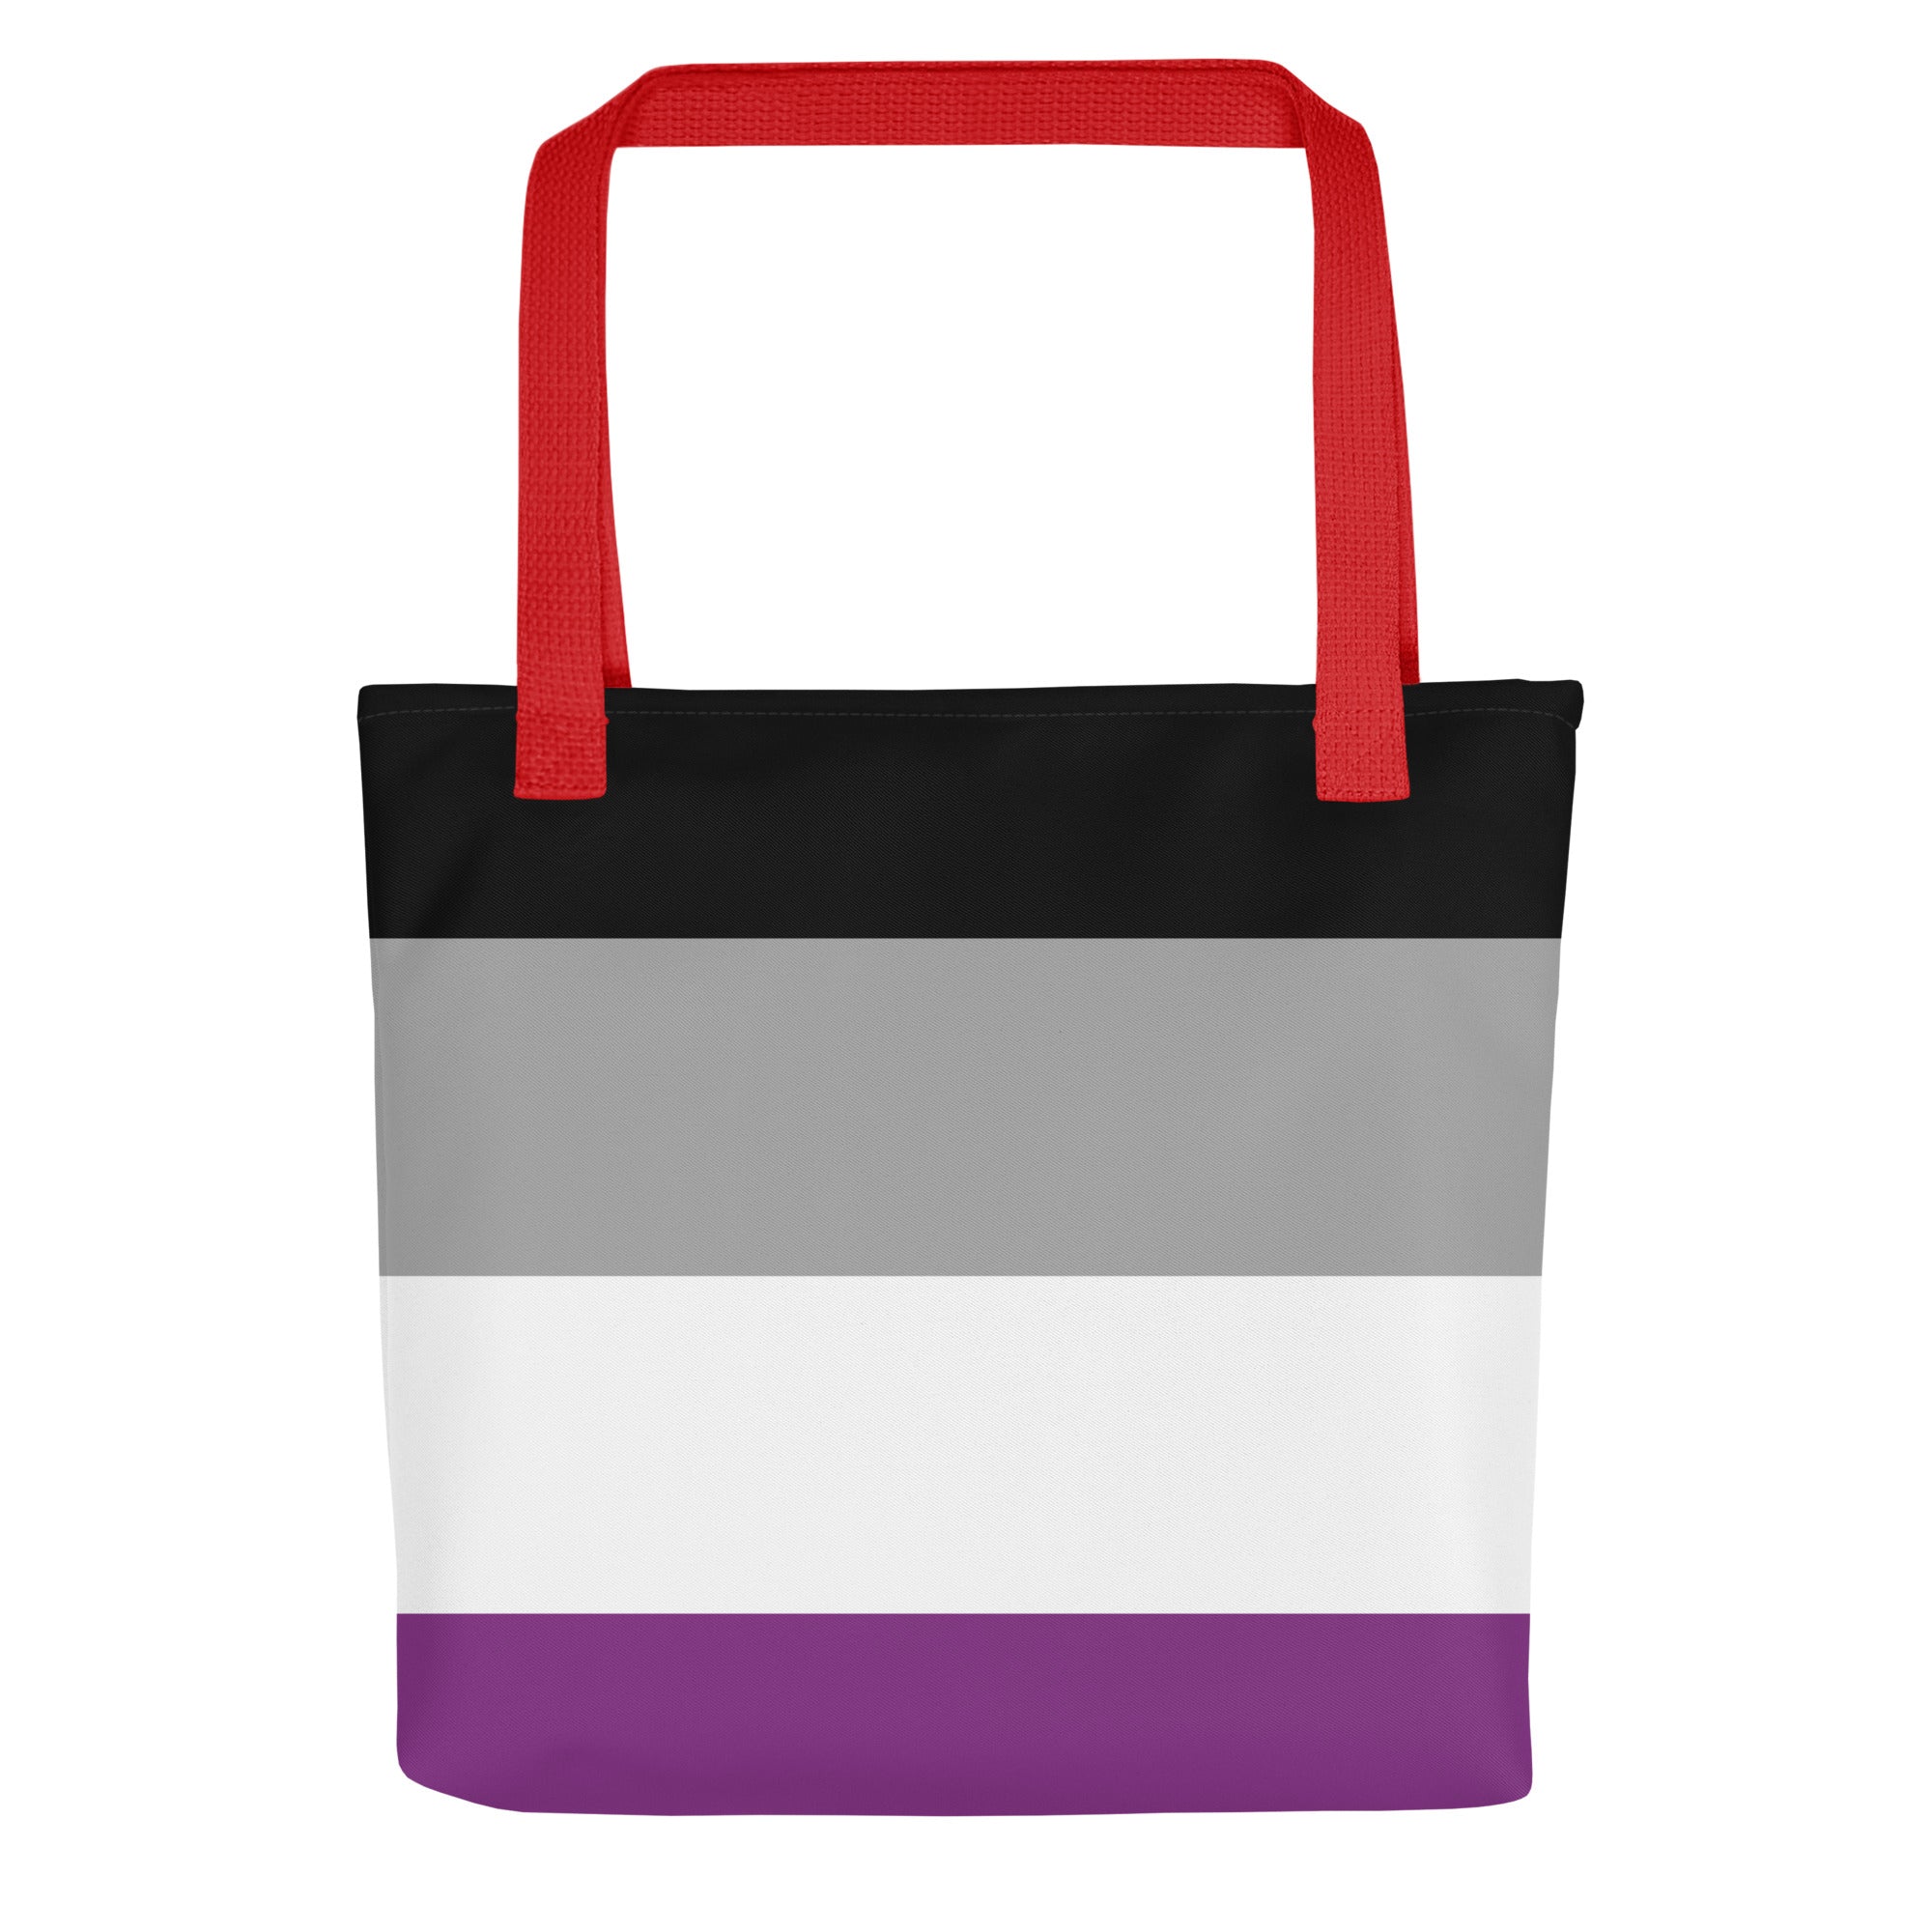 Tote bag- Asexual